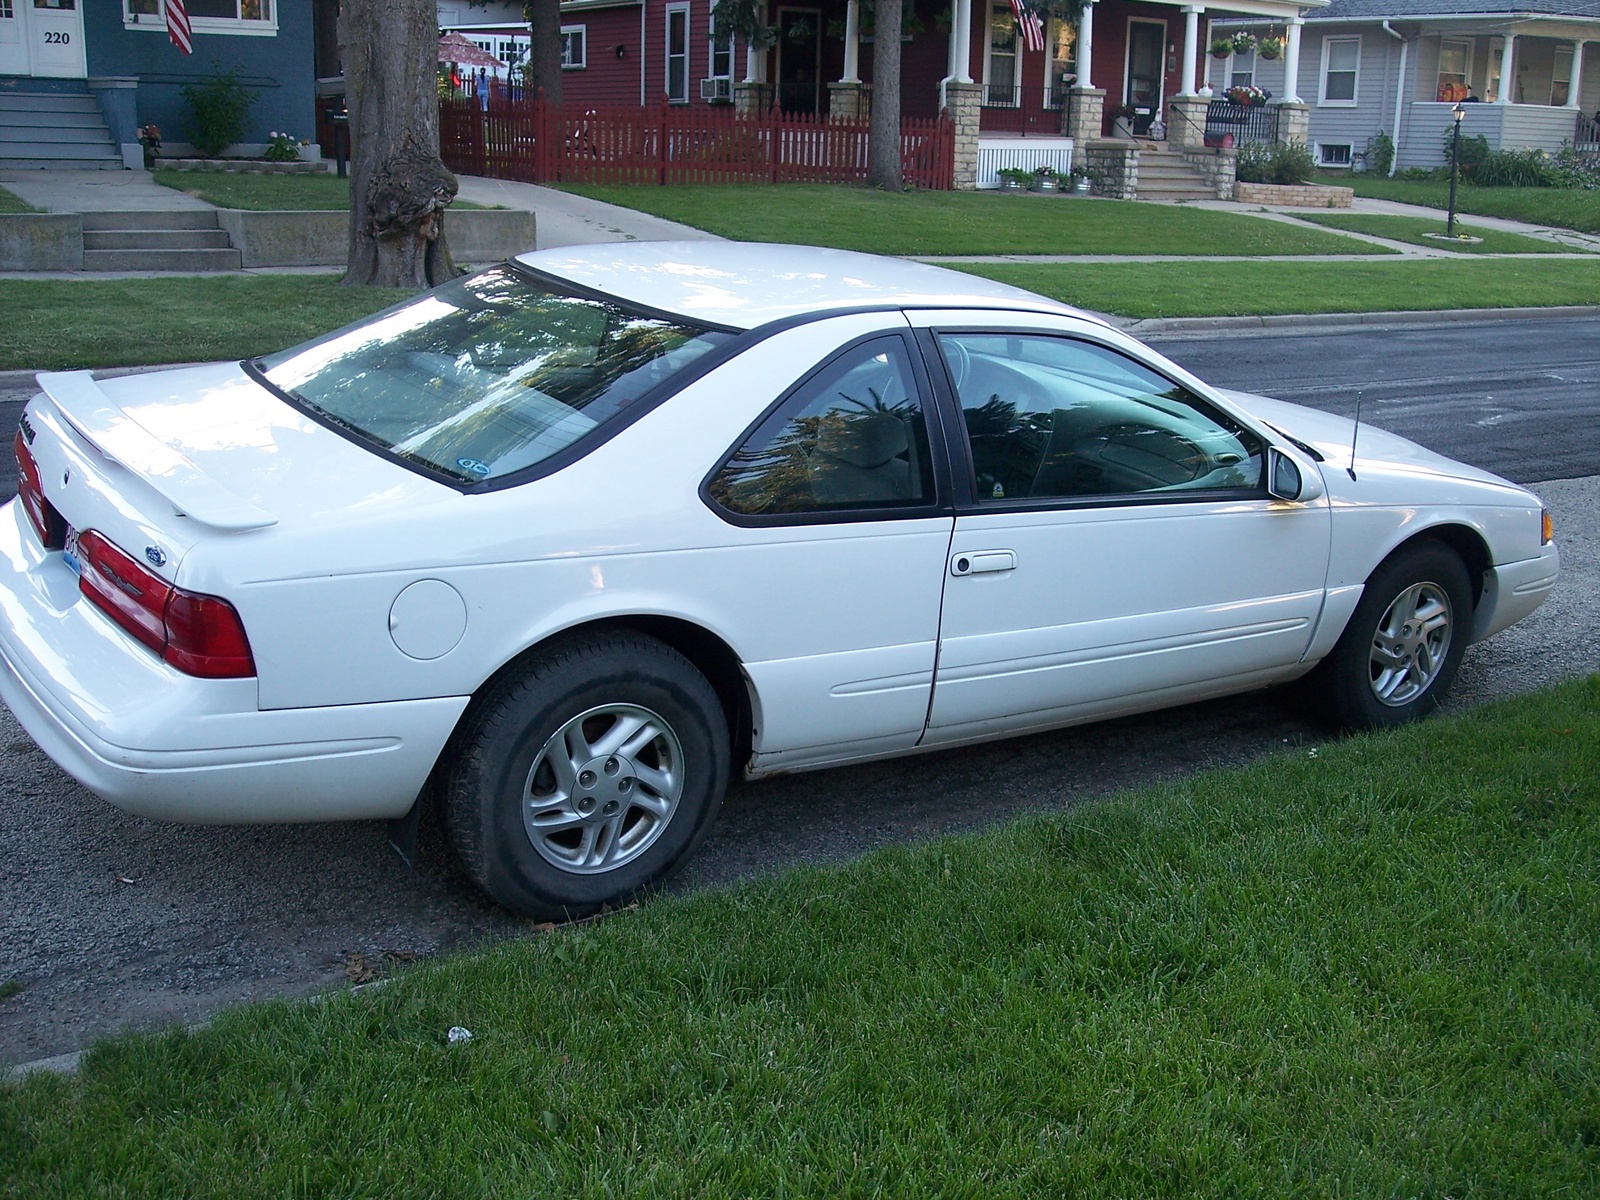 1996 Ford thunderbird lx coupe specs #3